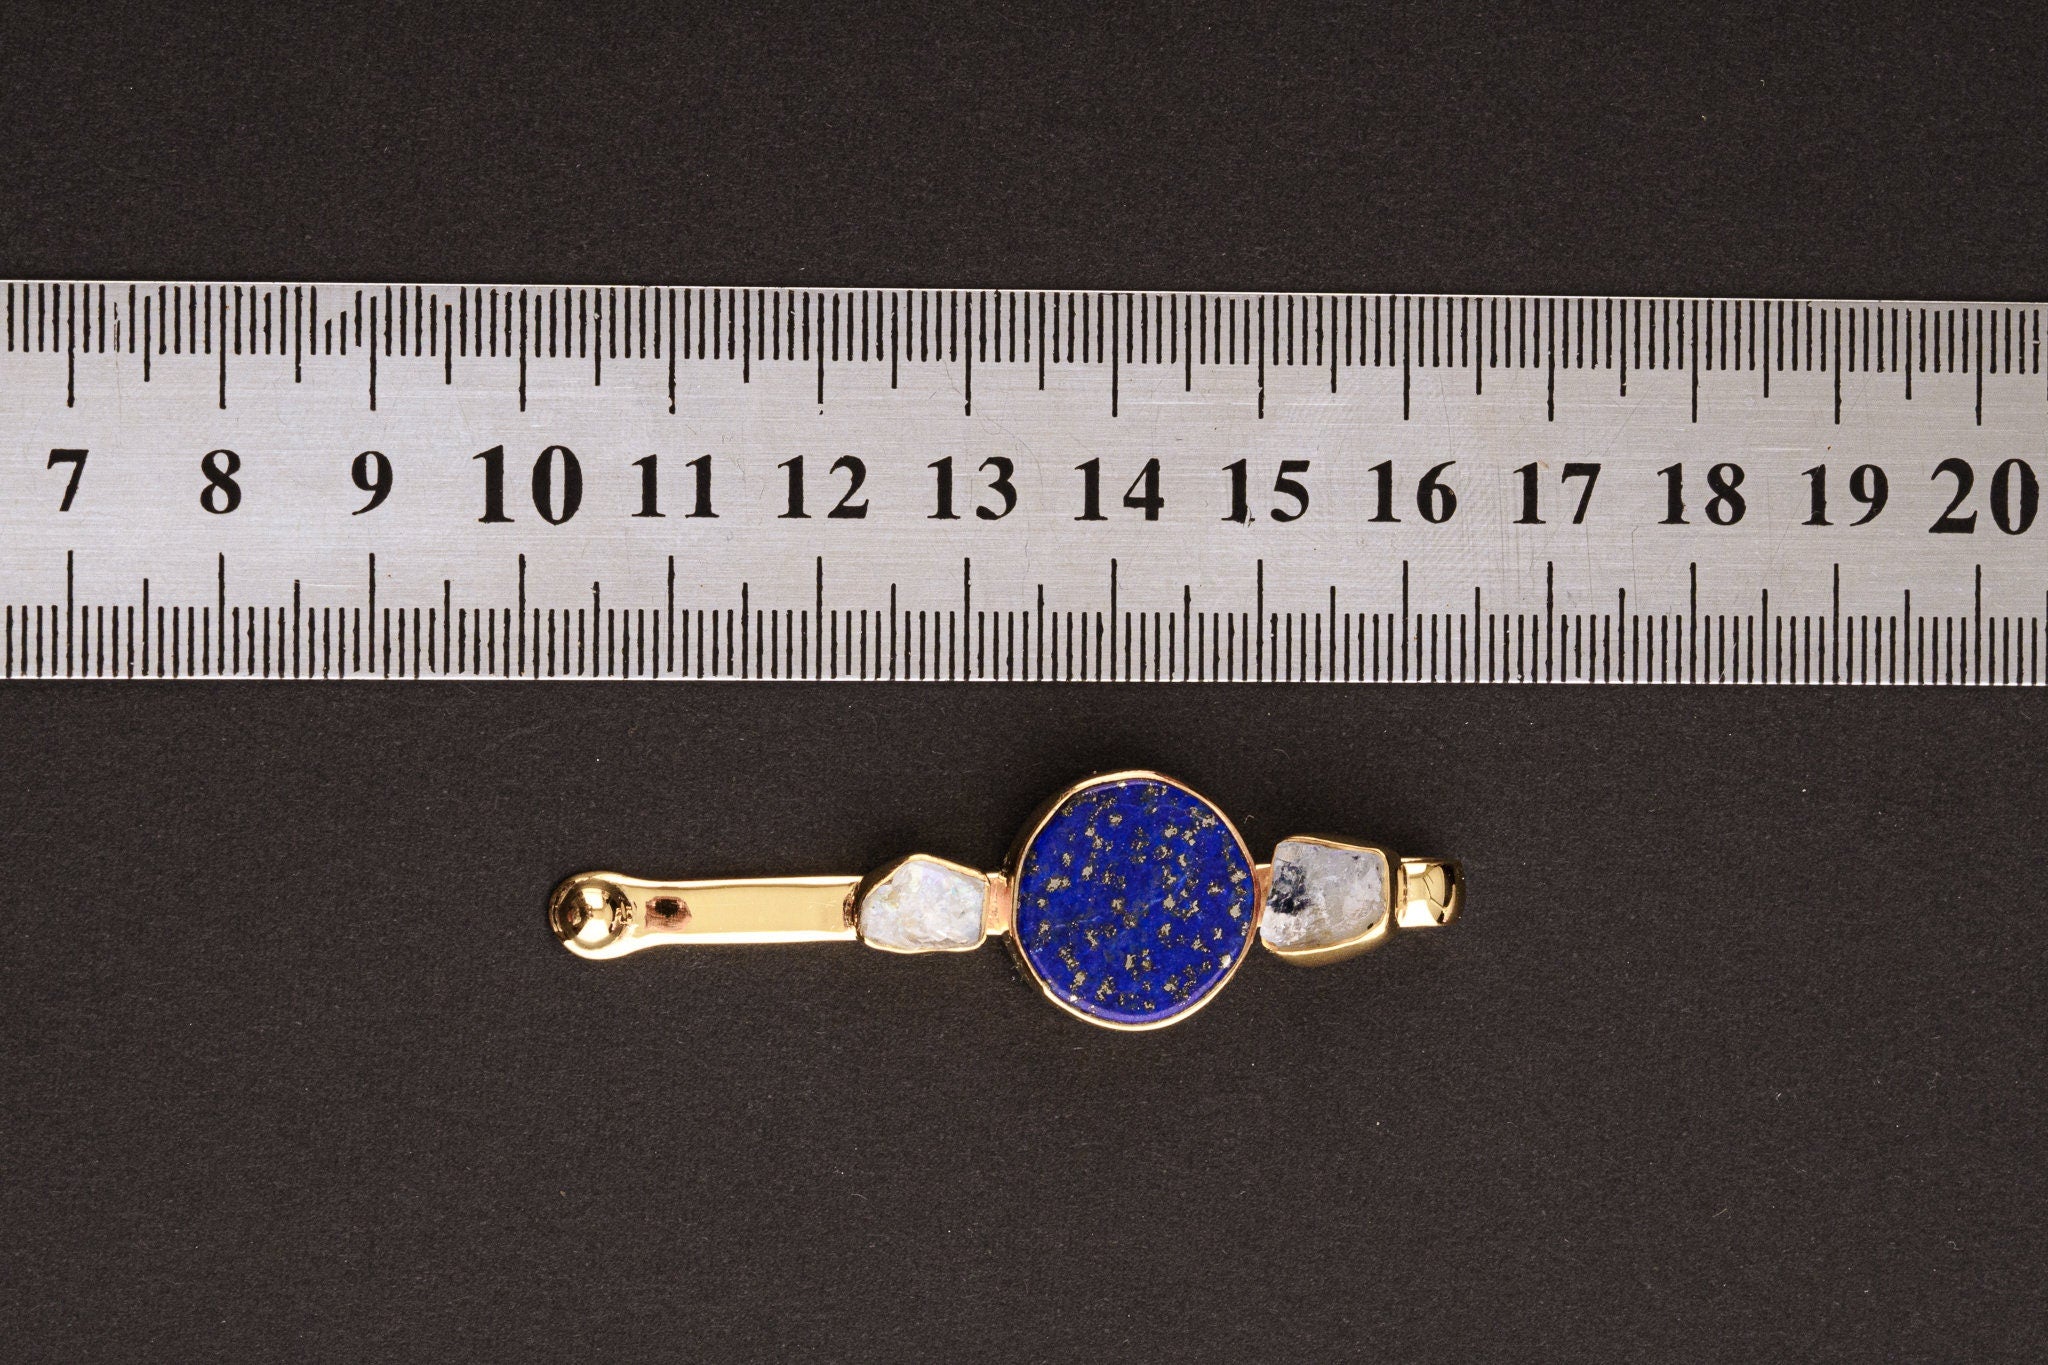 Gem Moonstone & Lapis Lazuli - Inverted Indian Ceremonial Spoon / Scoop Necklace - 16K Gold plated Cast Sterling Silver